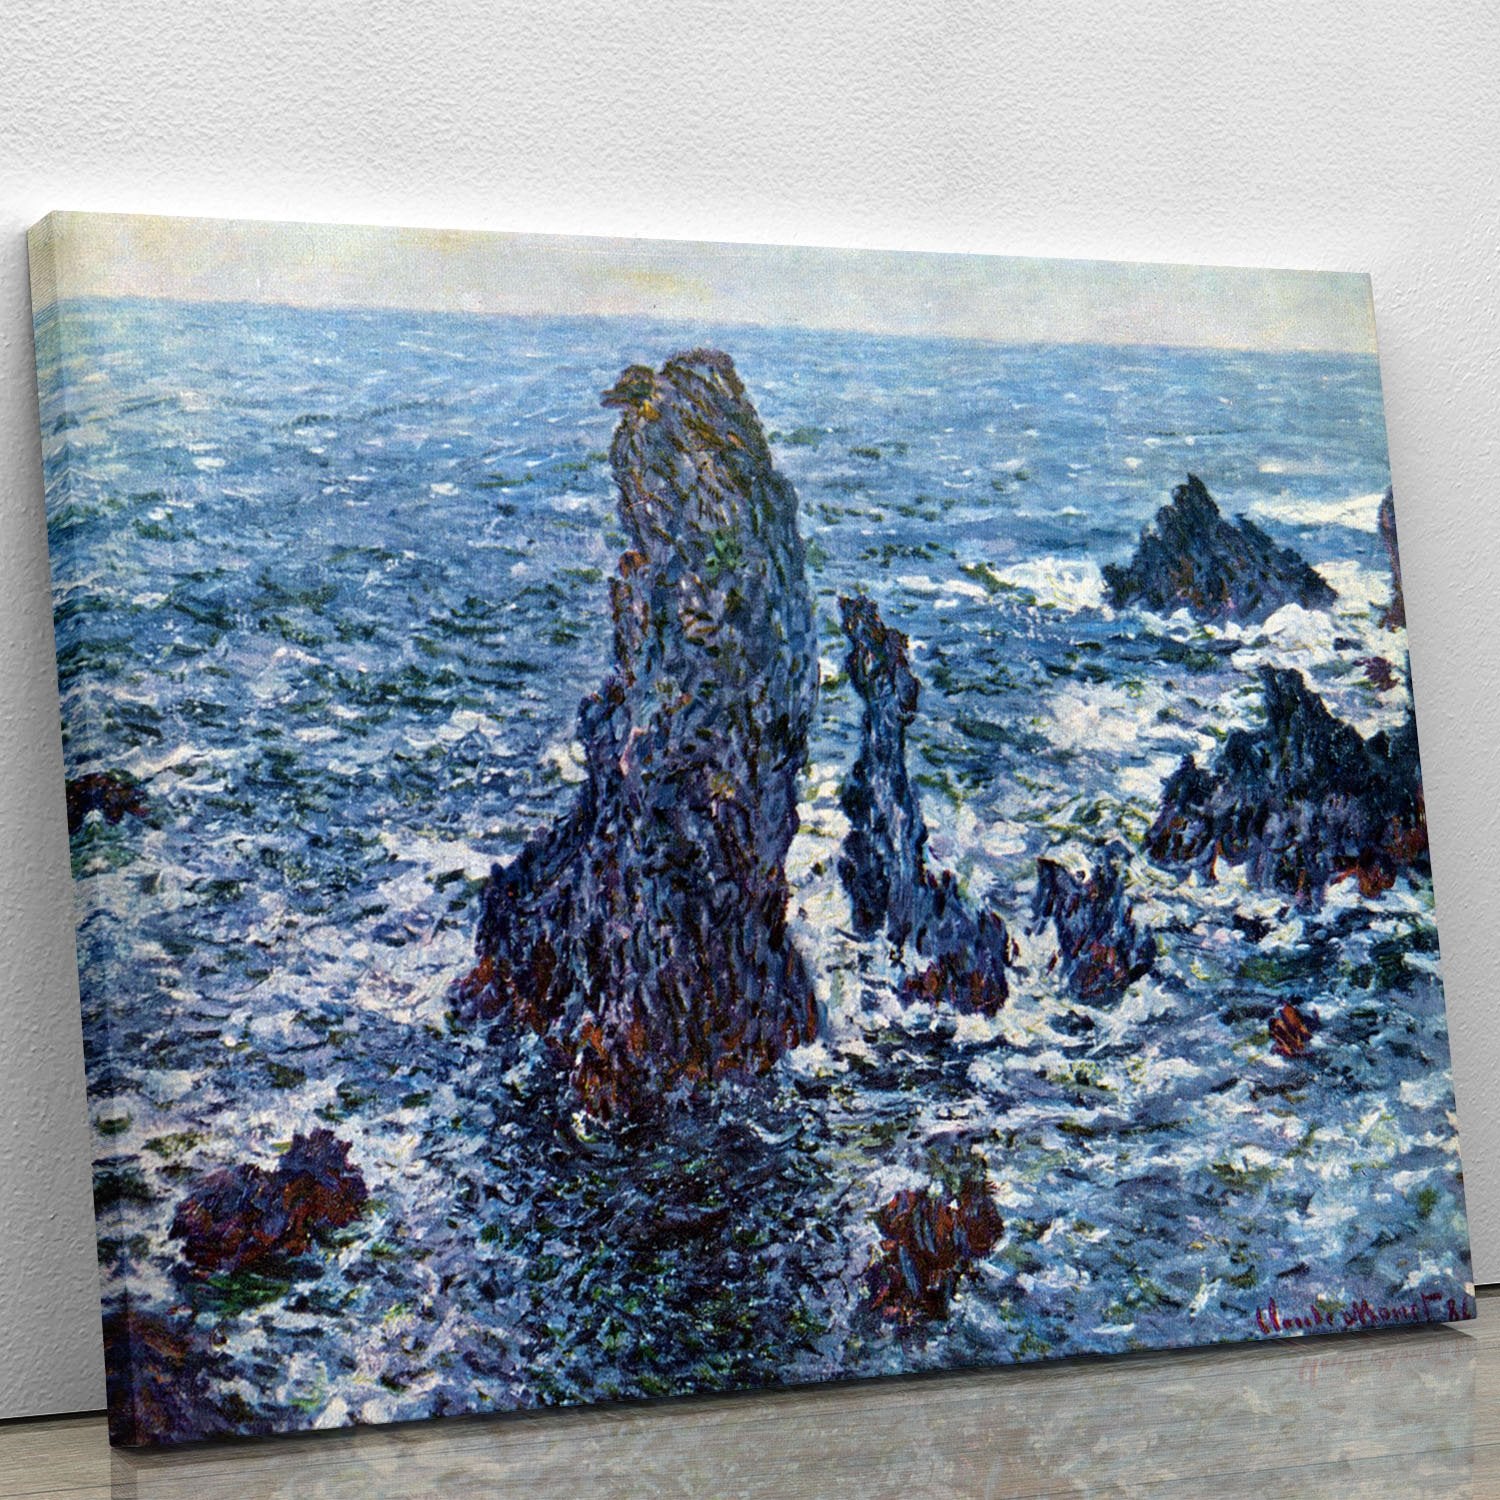 Rocks on Belle Ile The needles of Port Coton by Monet Canvas Print or Poster